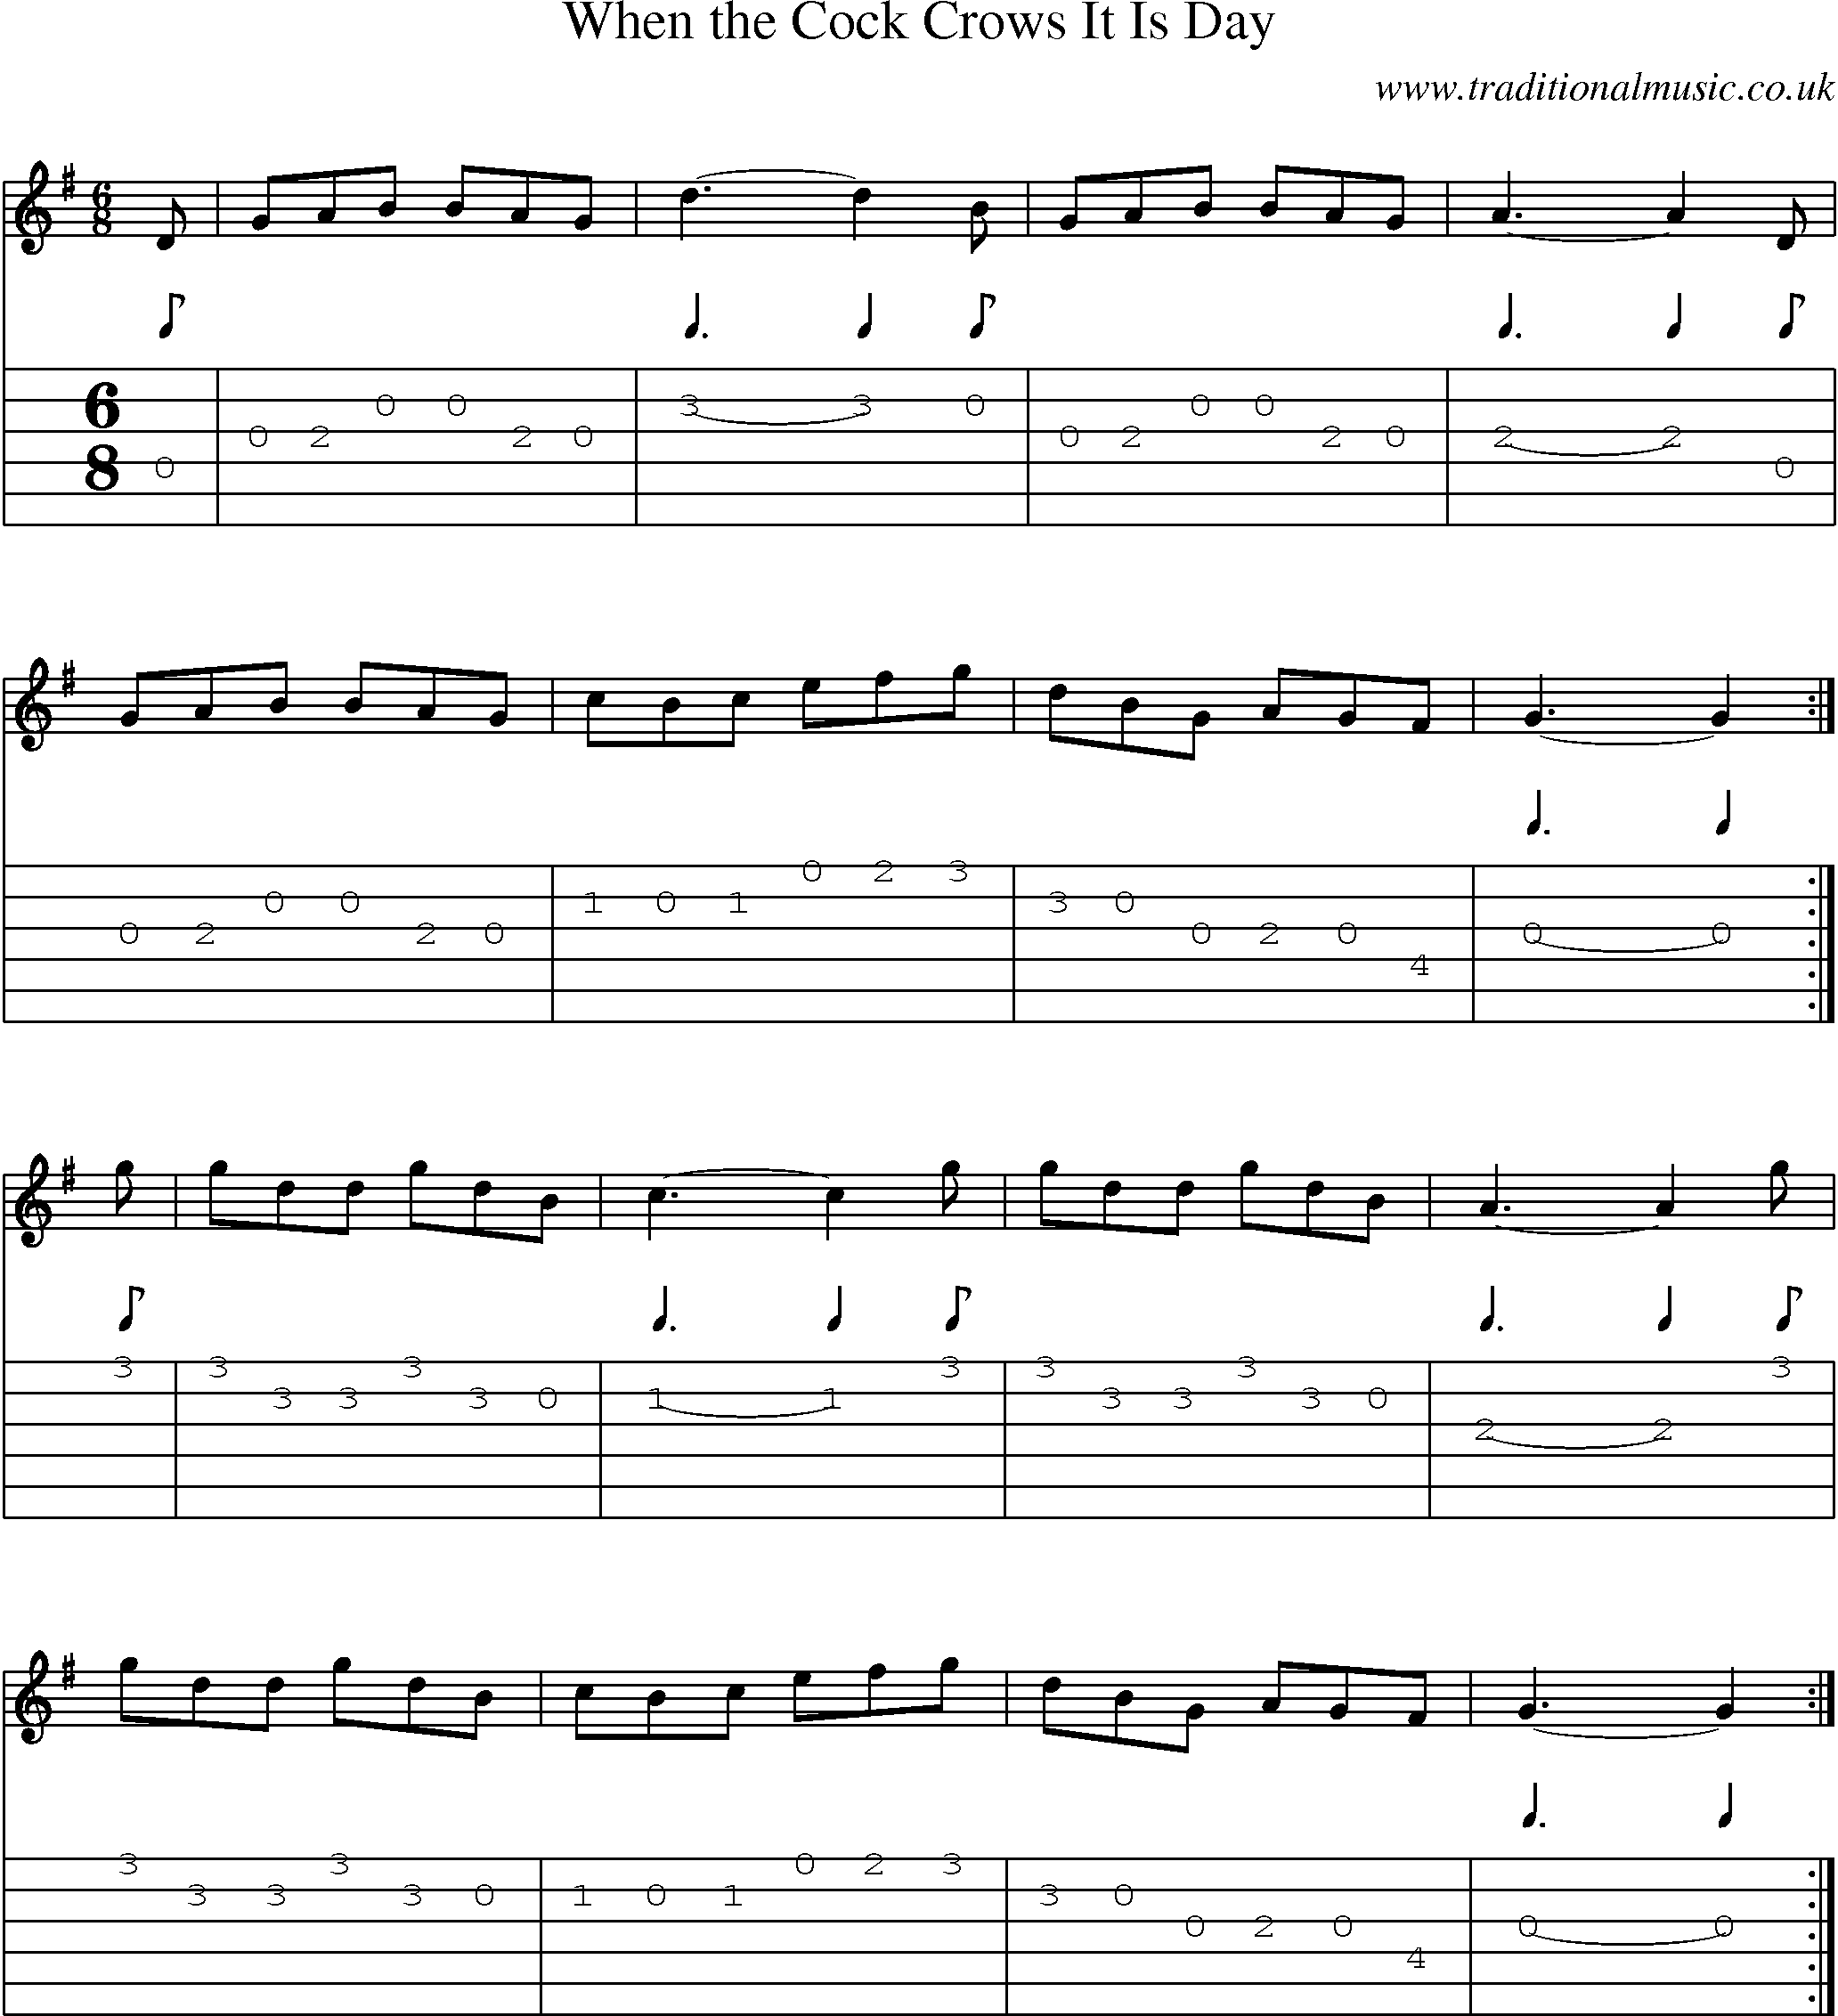 Music Score and Guitar Tabs for When Cock Crows It Is Day